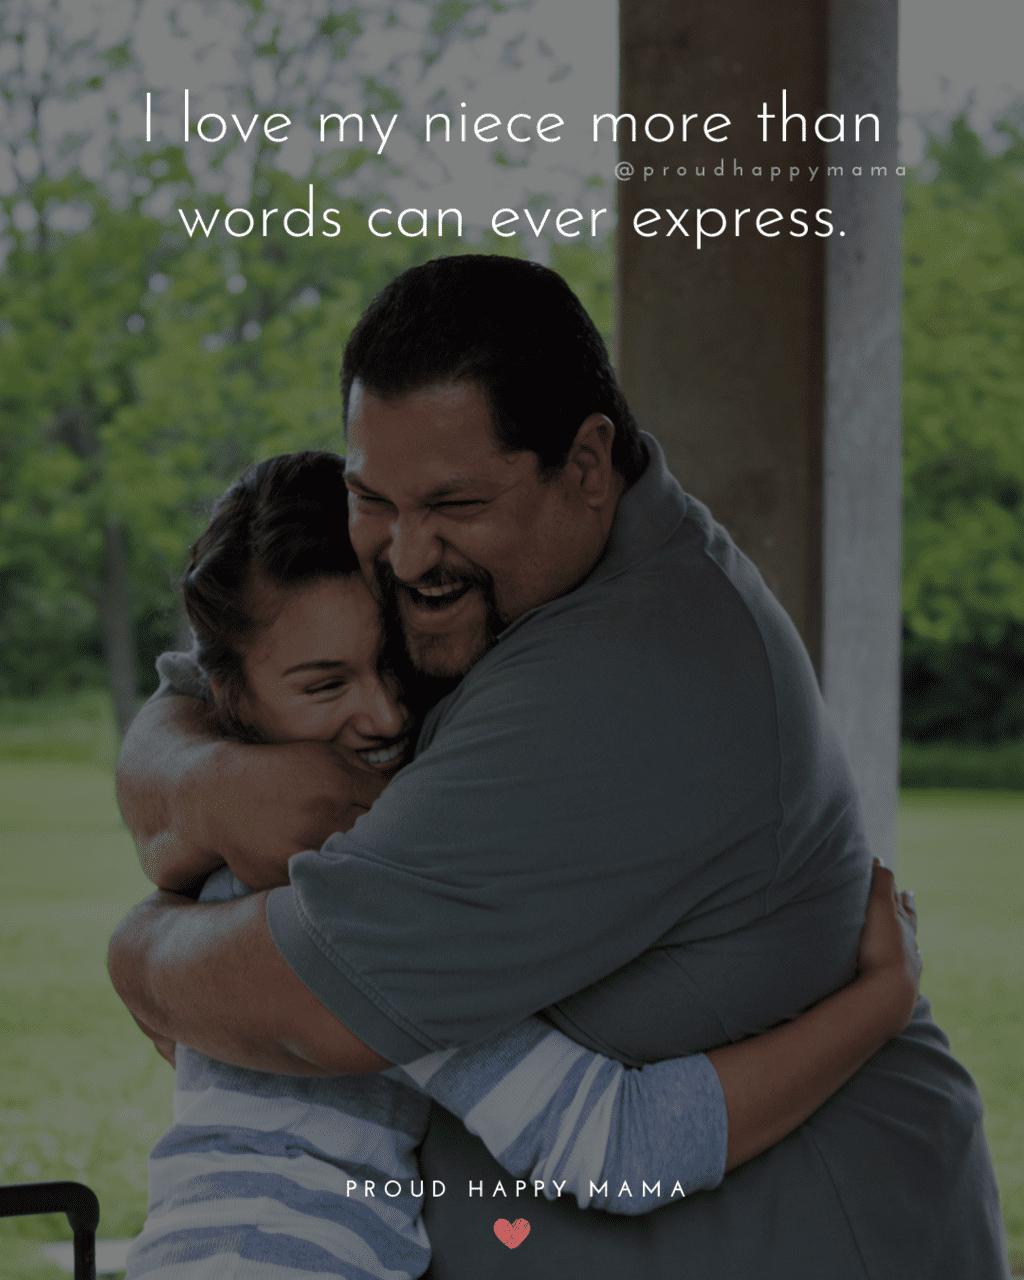 Uncle hugging niece with I love my niece quote text overlay. 'I love my niece more than words can ever express.'